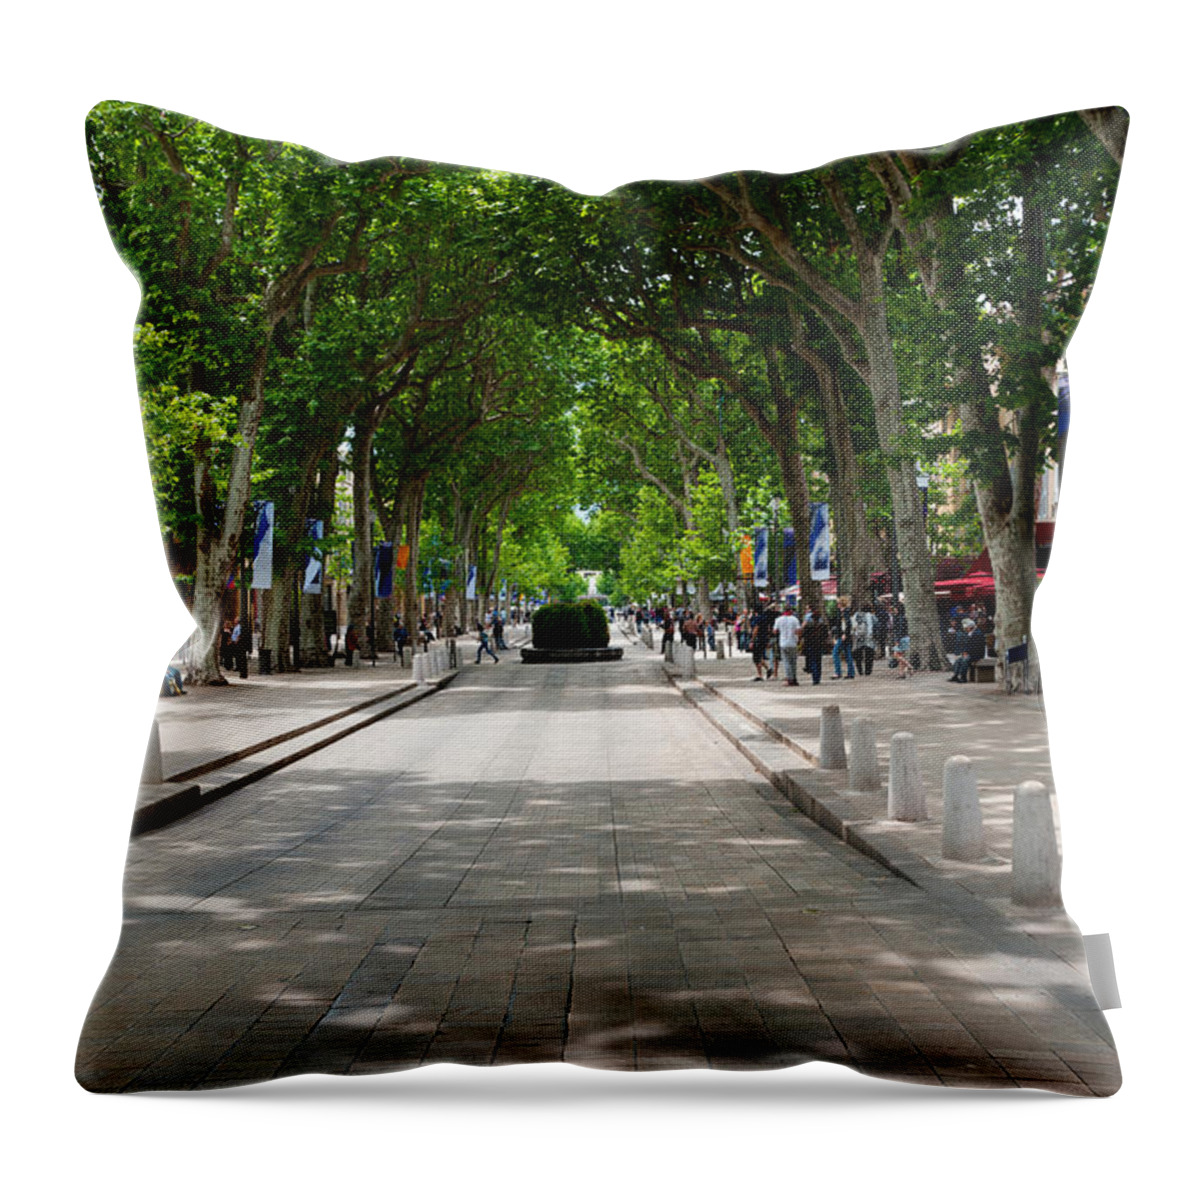 Photography Throw Pillow featuring the photograph Street Scene, Cours Mirabeau by Panoramic Images